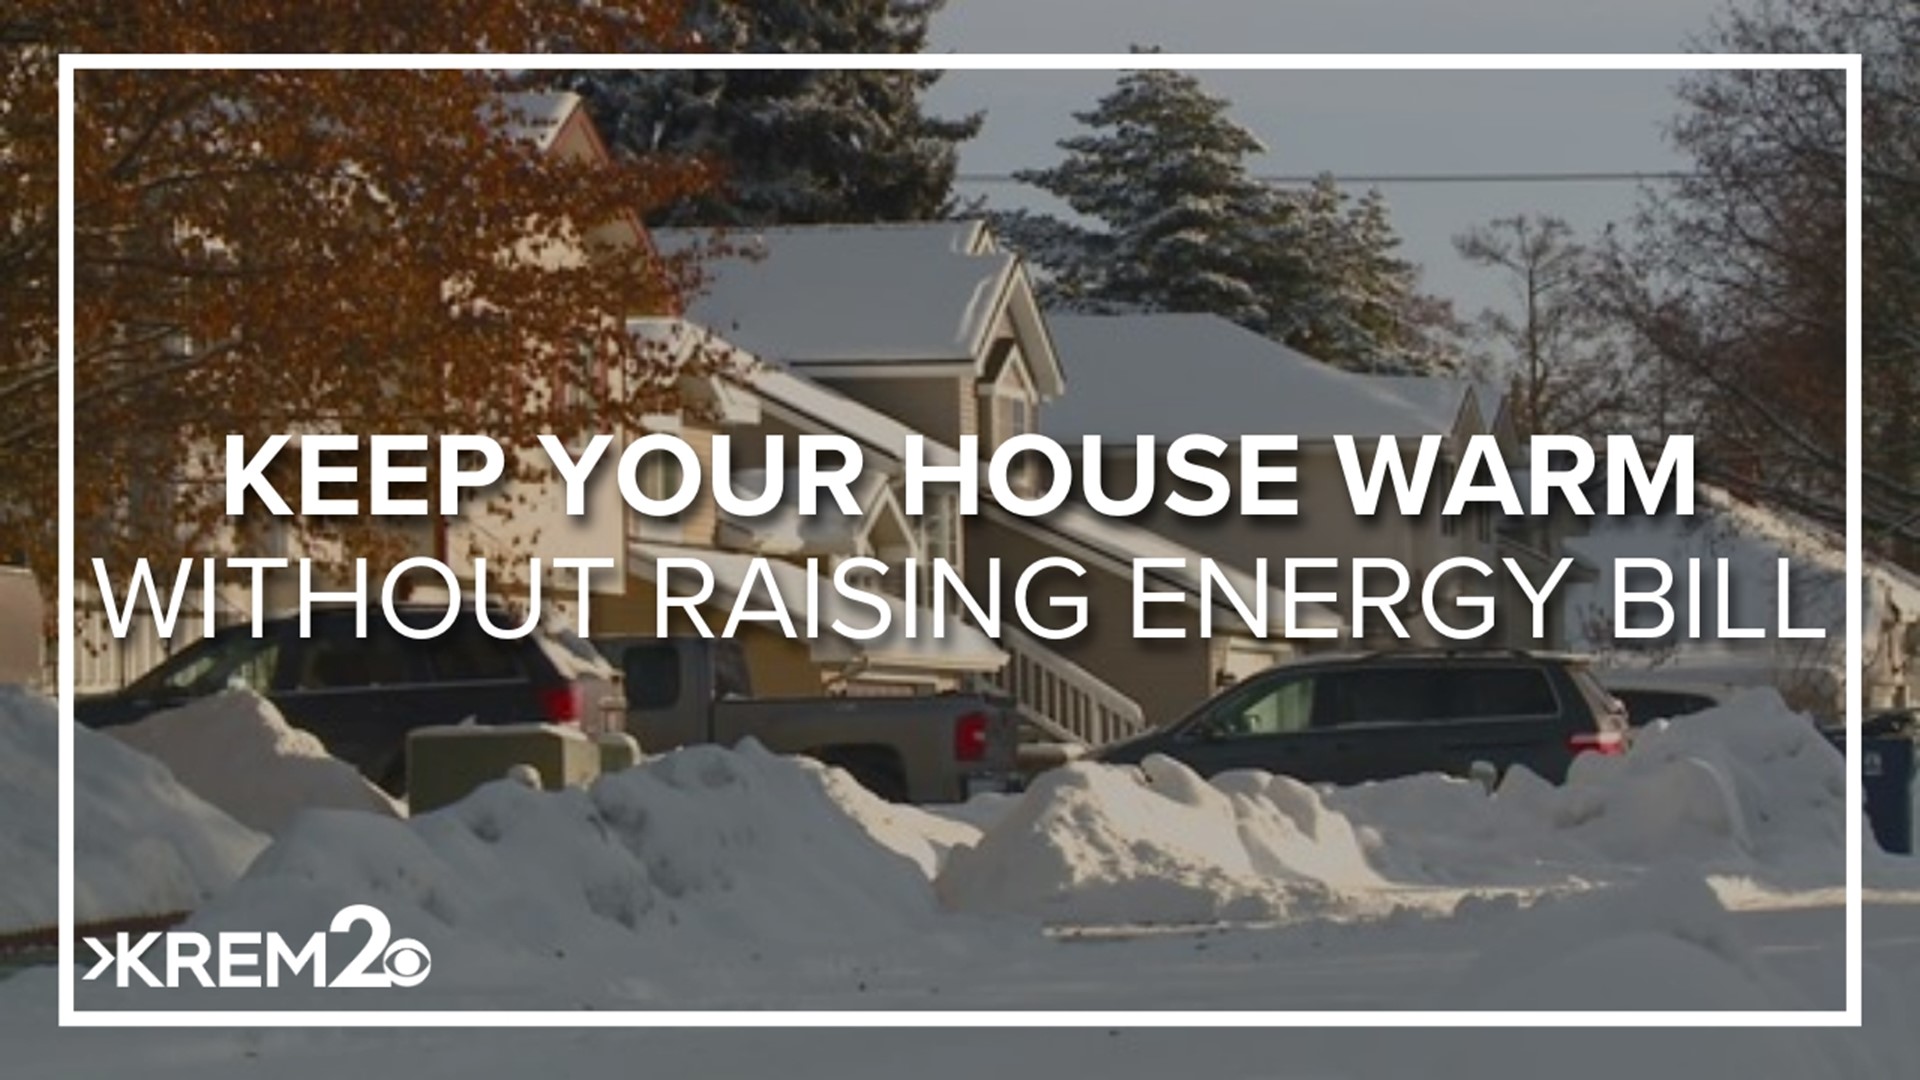 Avista shared some tips people can follow to stay warm in their homes while keeping their energy bills as low as possible during this cold snap.